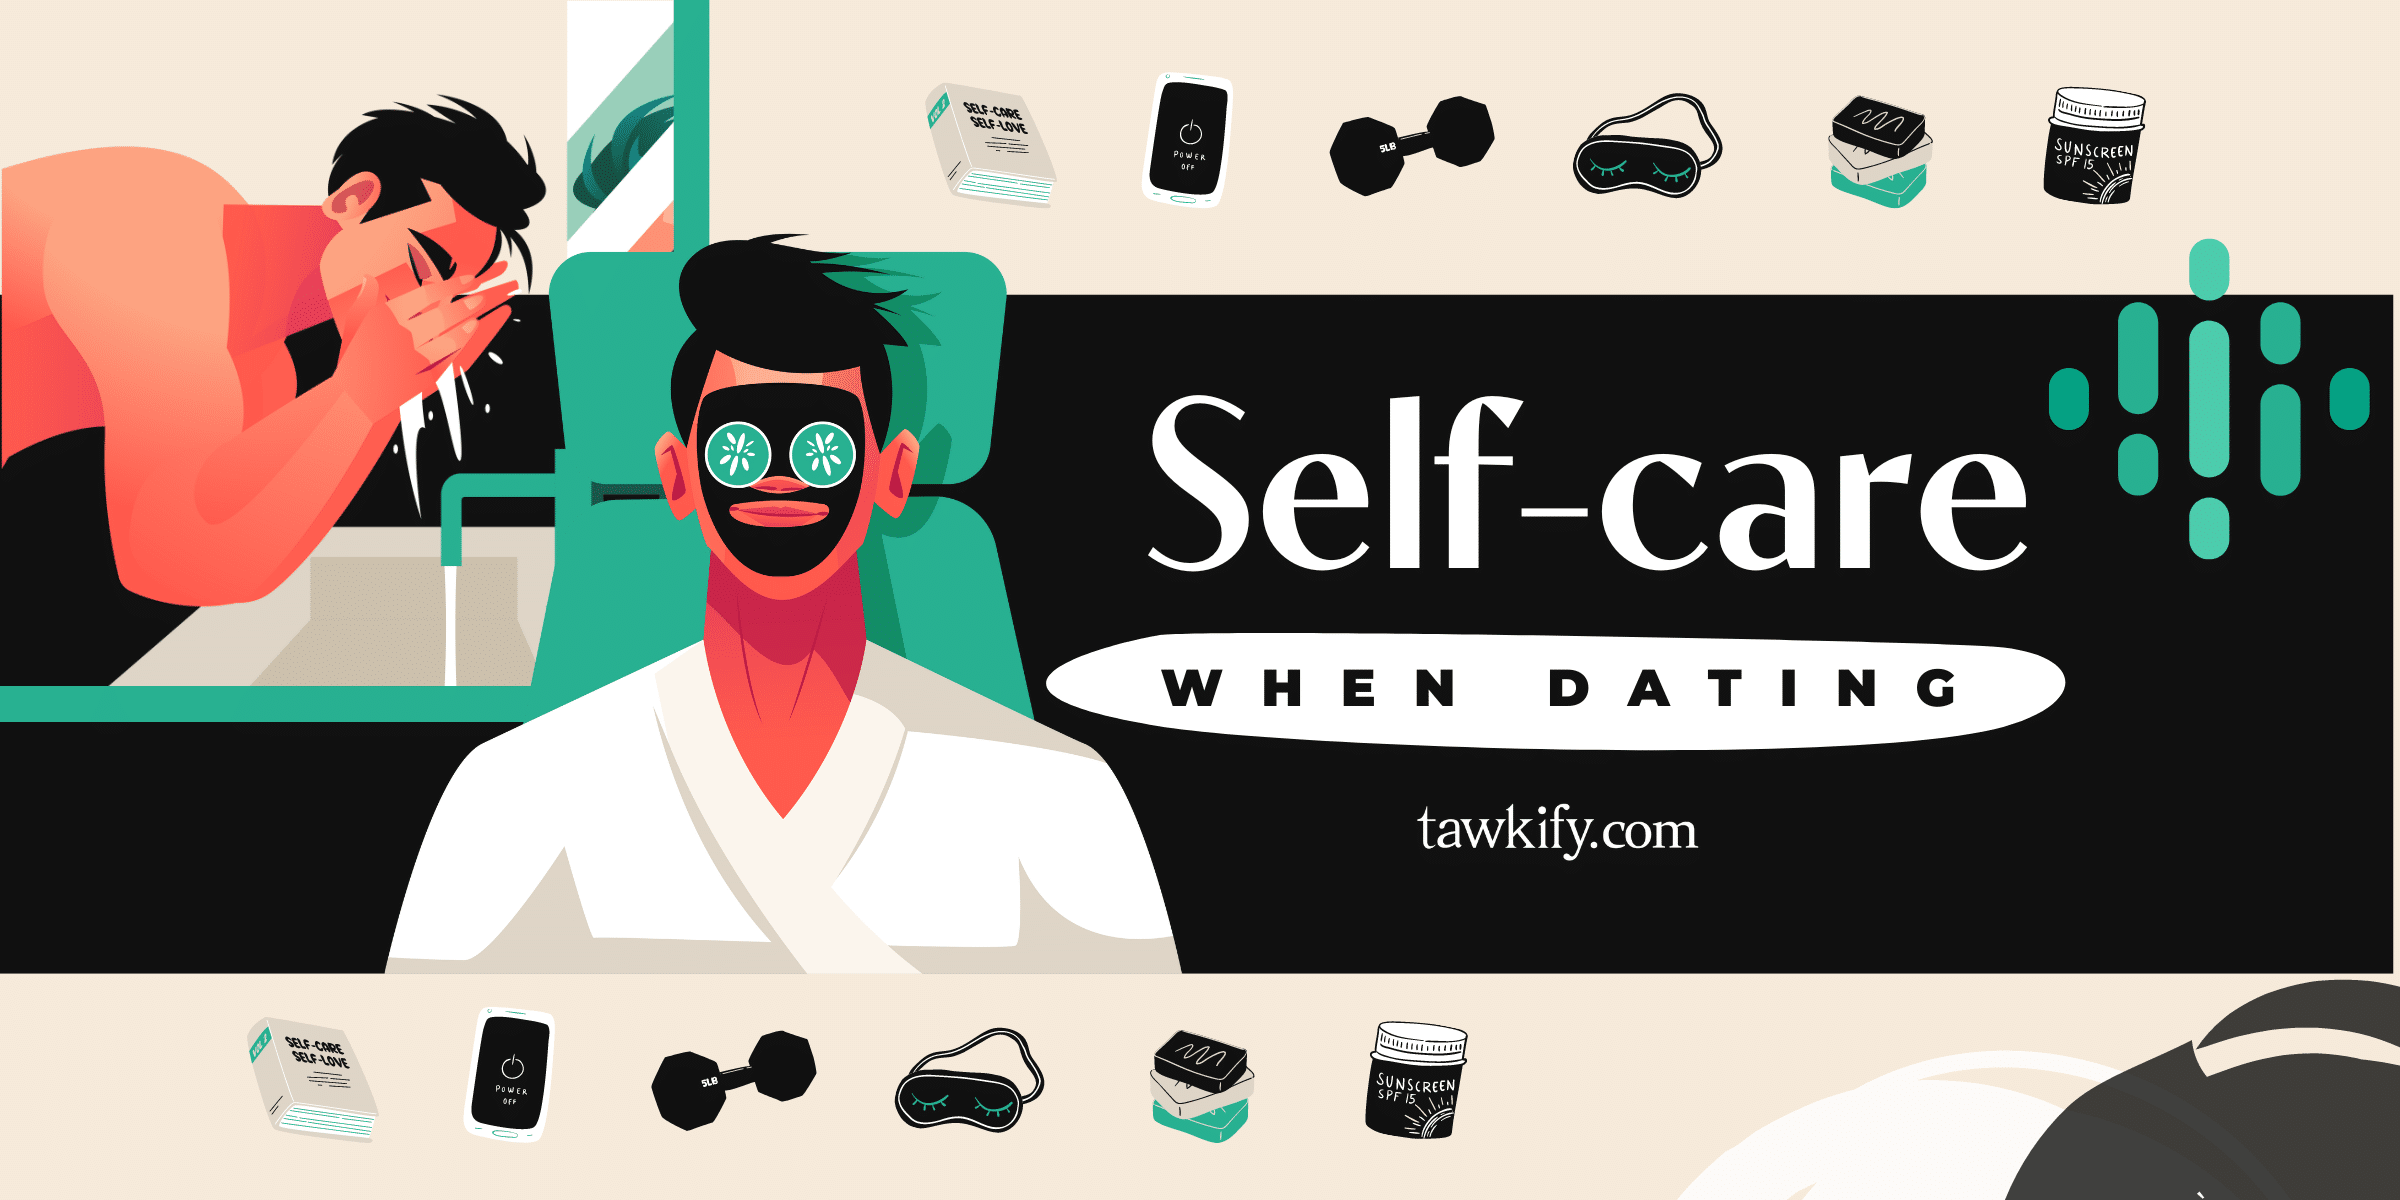 Practicing self-care when dating is the key to success. Our guide explores the importance of self-care and offers advice on how to start your own routine.